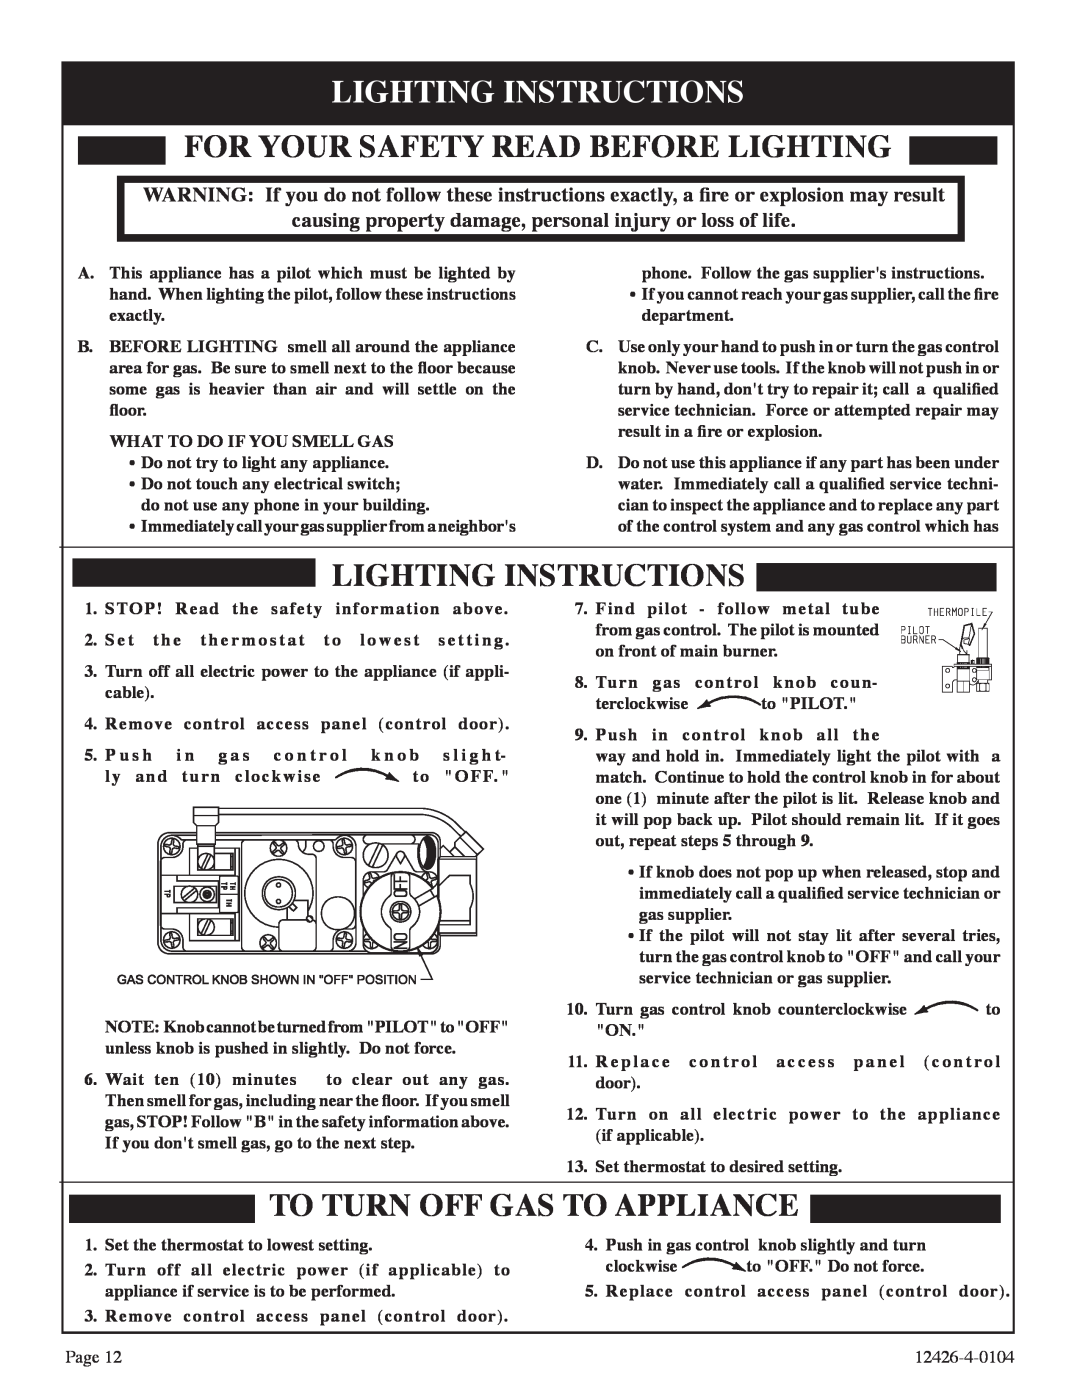 Empire Comfort Systems GWT-50-2 Lighting Instructions, For Your Safety Read Before Lighting, To Turn Off Gas To Appliance 